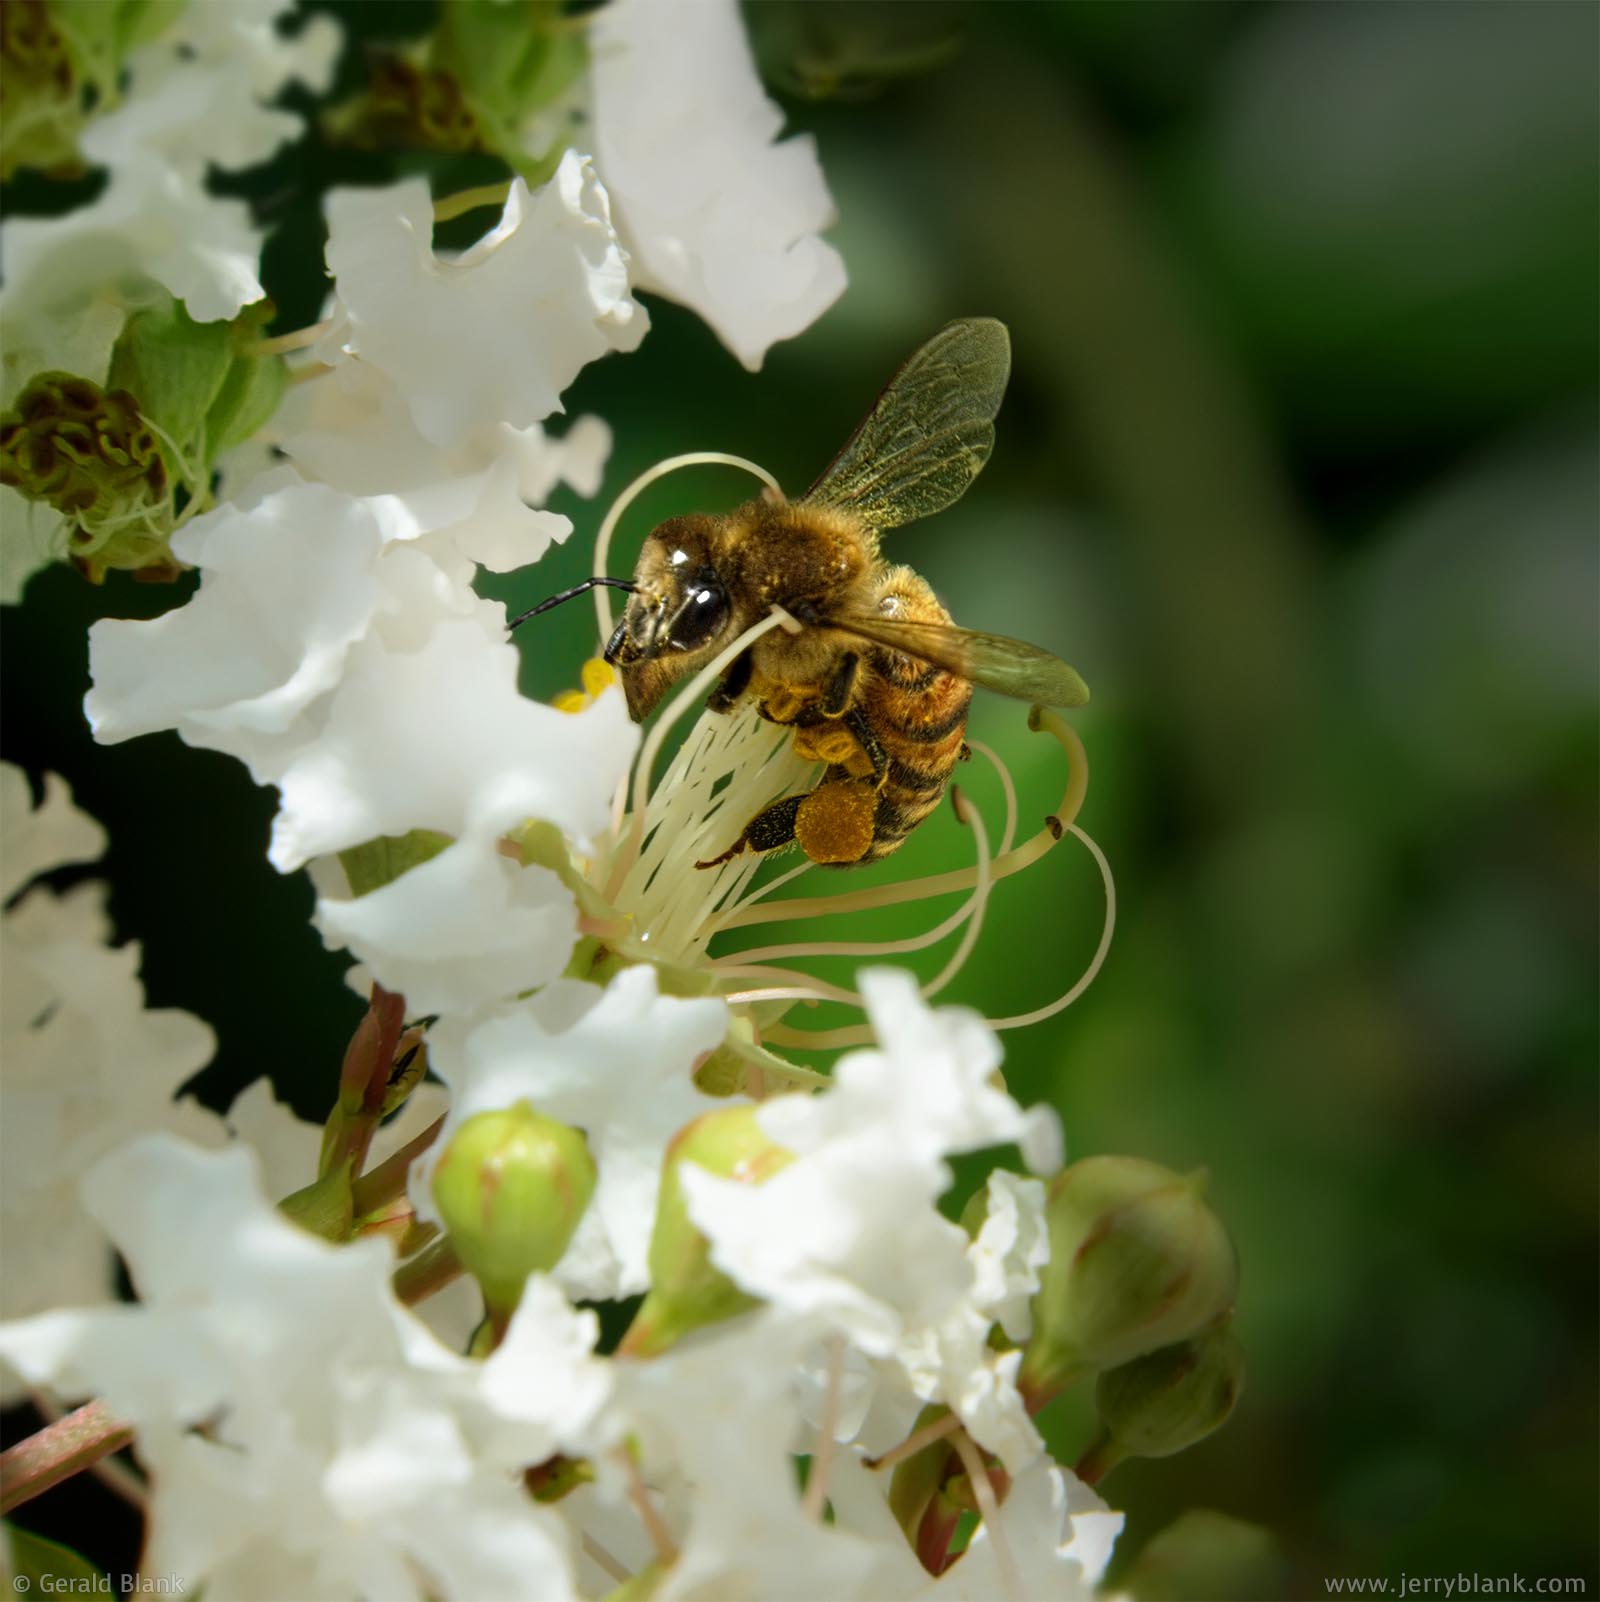 #20072 - Honeybee visits crepe myrtle blossoms in Orange County, Florida, in springtime - photo by Jerry Blank